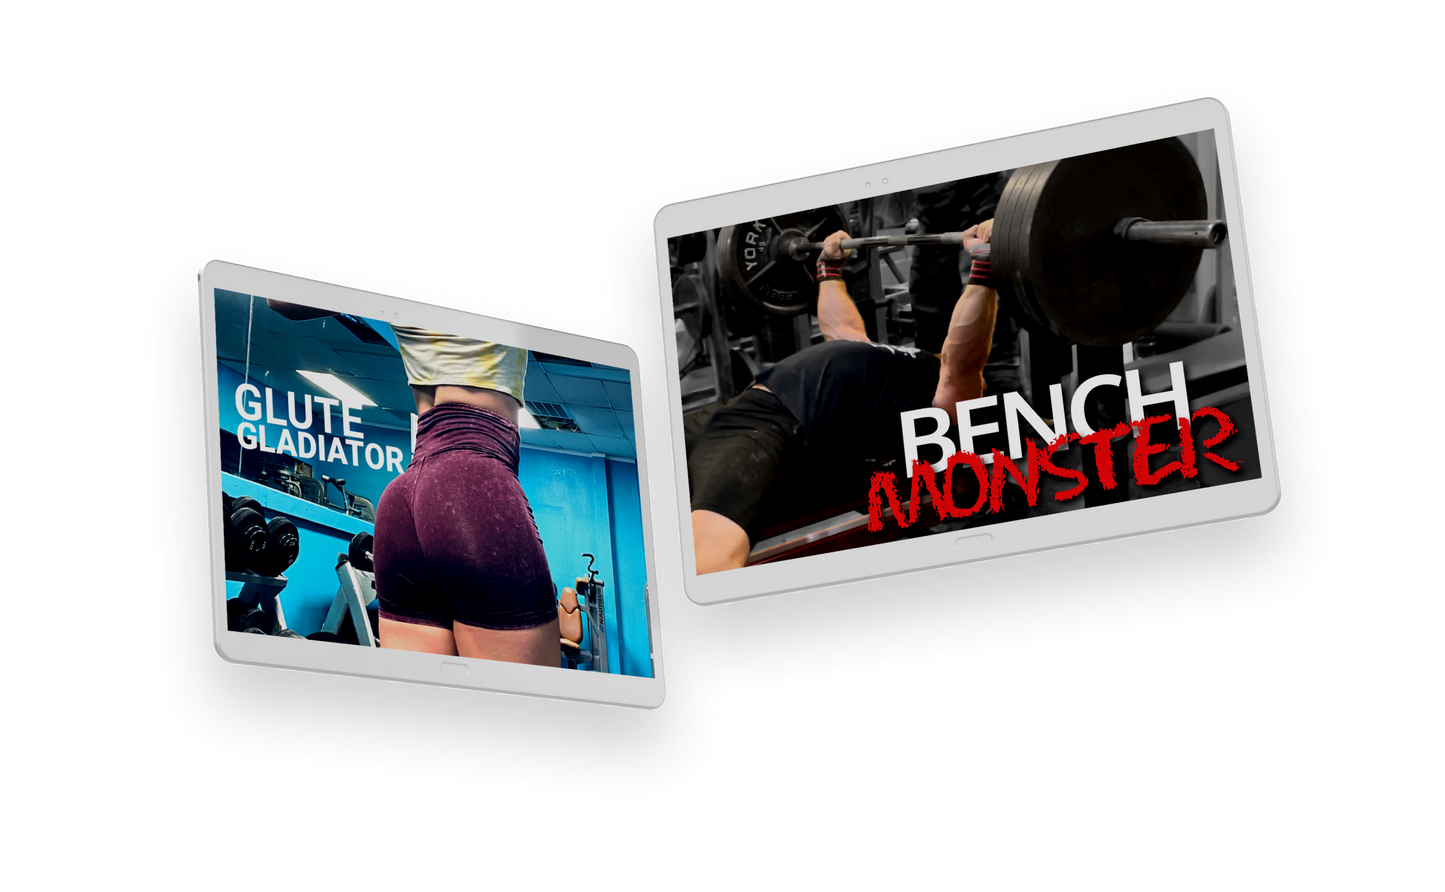 Glute Gladiator and Bench Monster covers on tablets